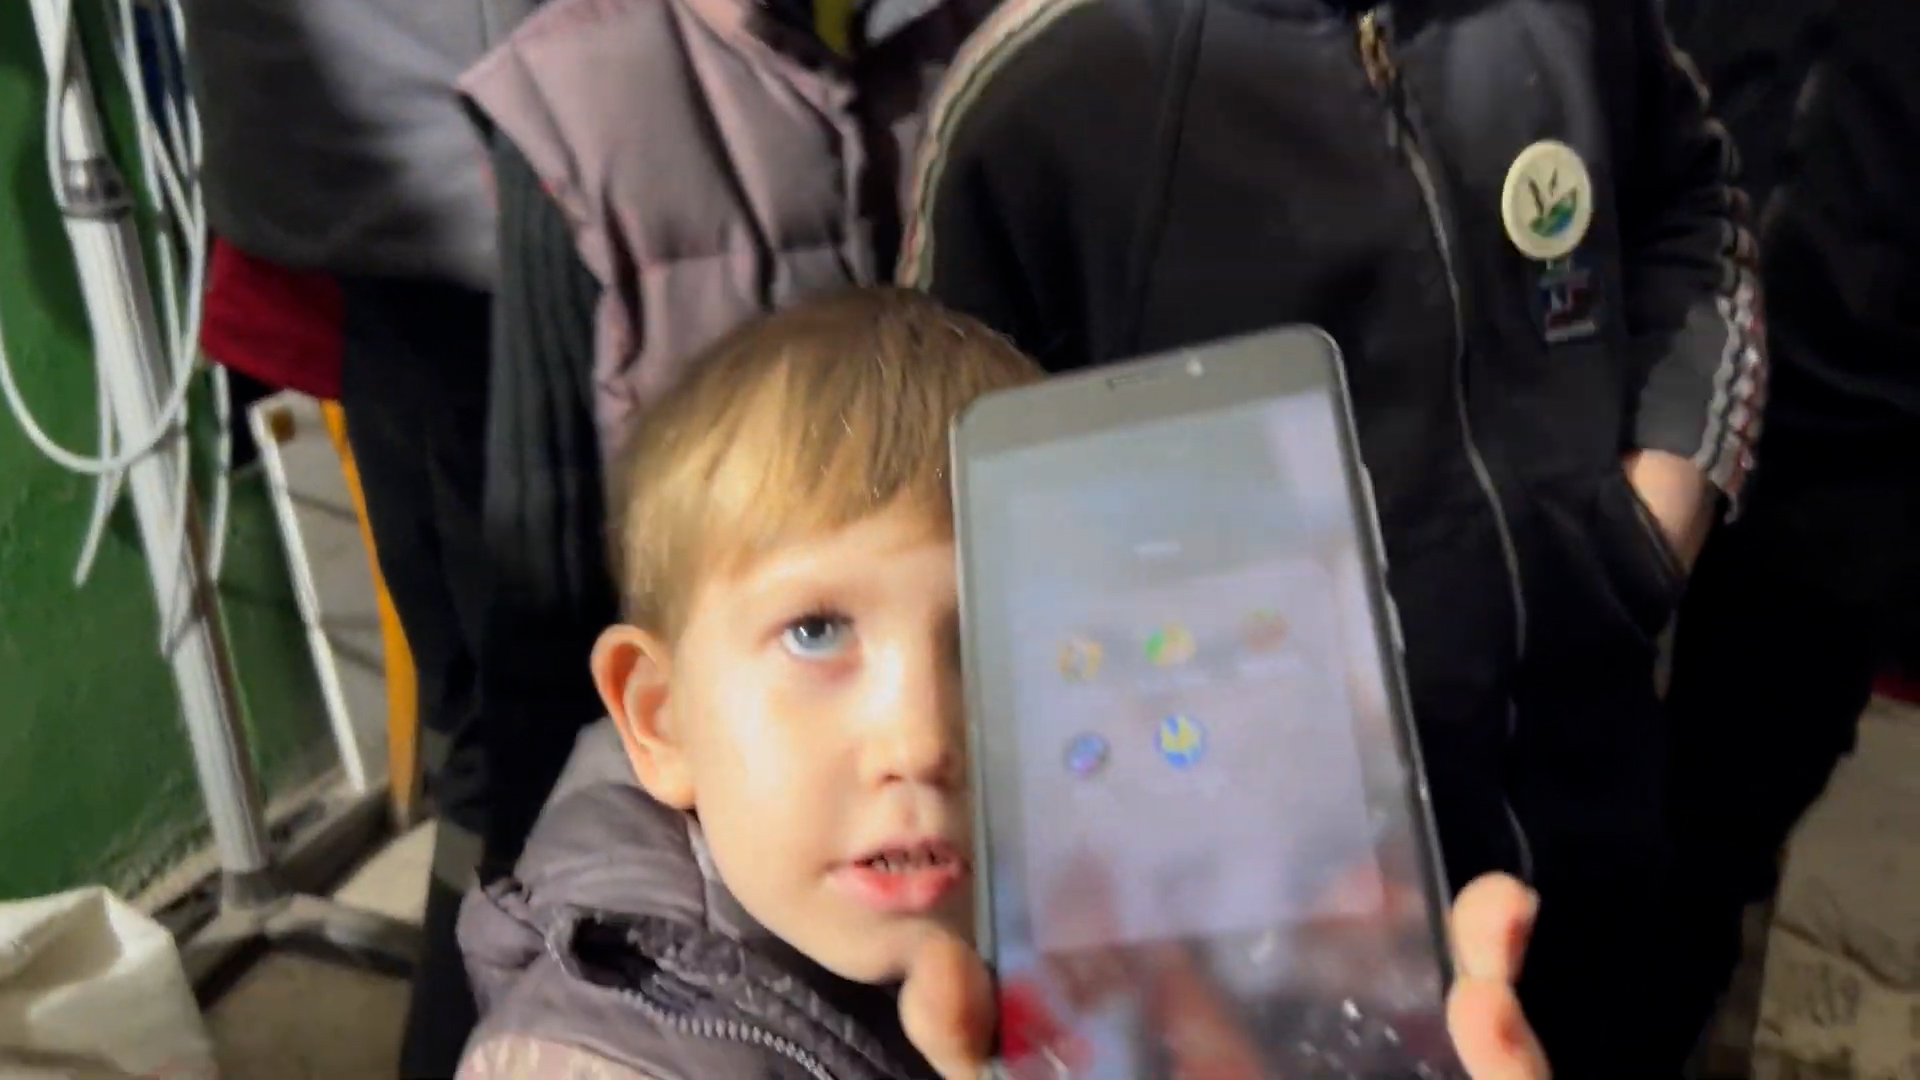 boy showing cell phone screen